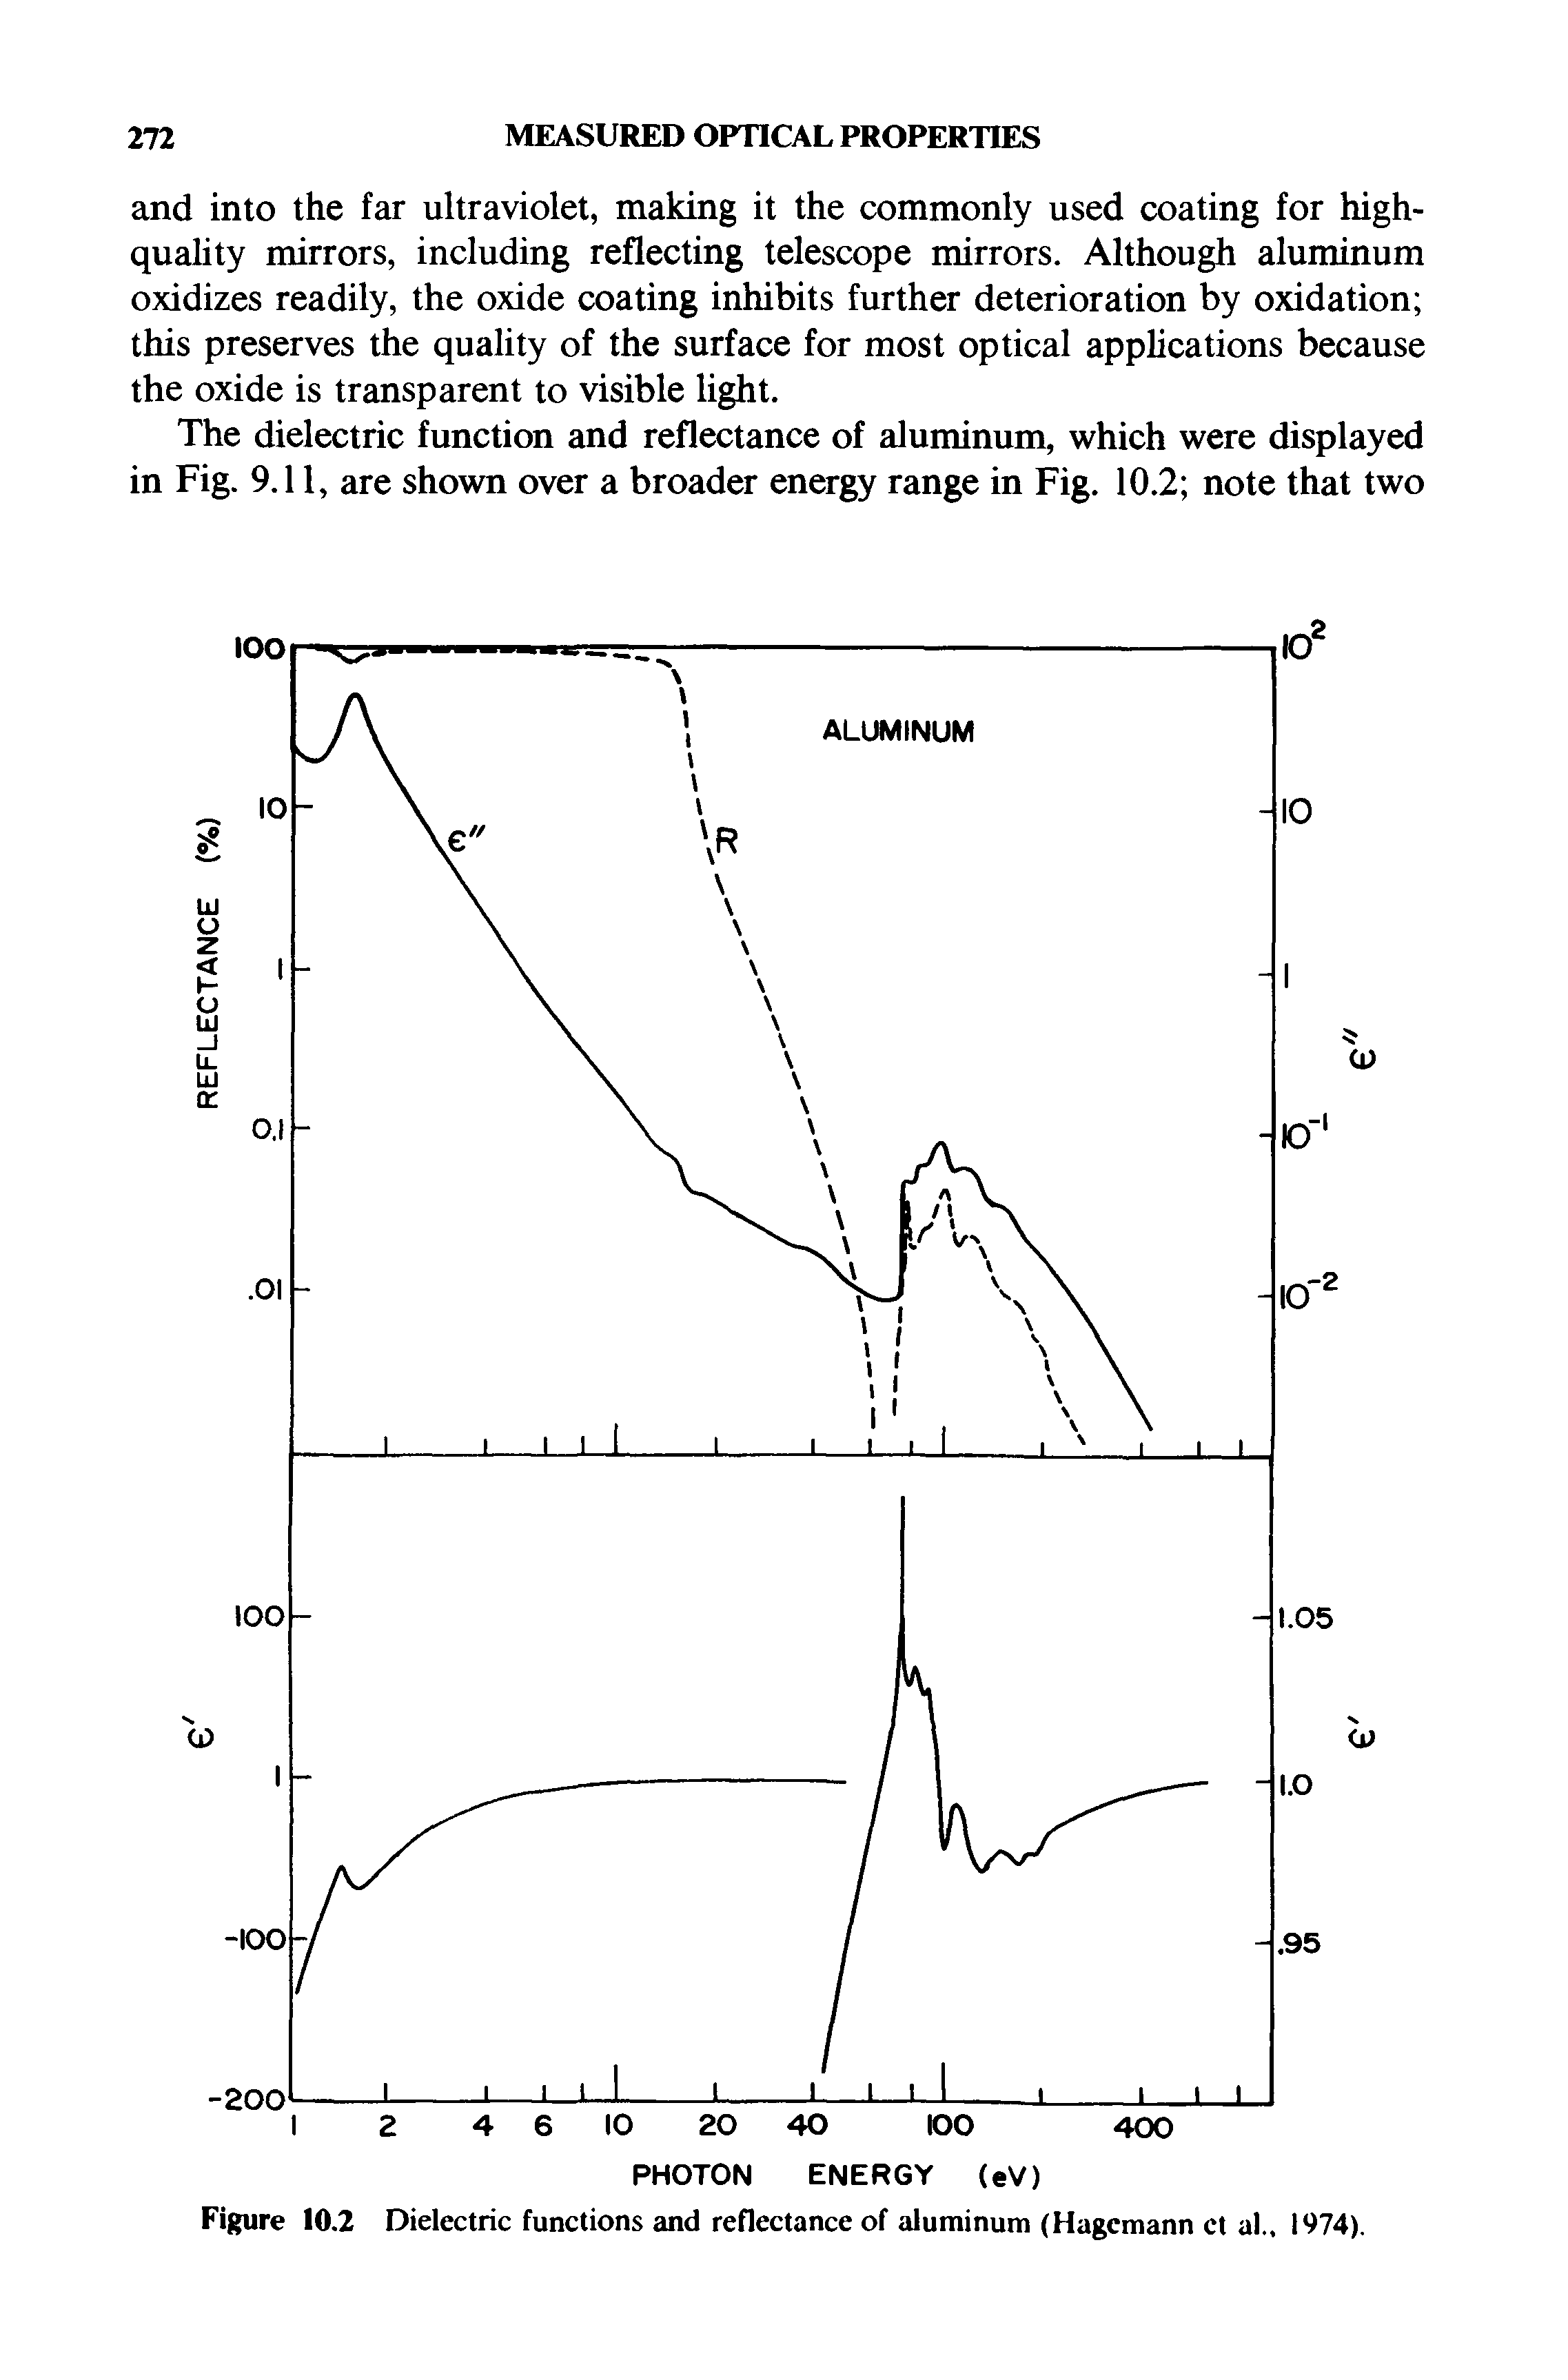 Figure 10.2 Dielectric functions and reflectance of aluminum (Hagcmann ct al., 1974).